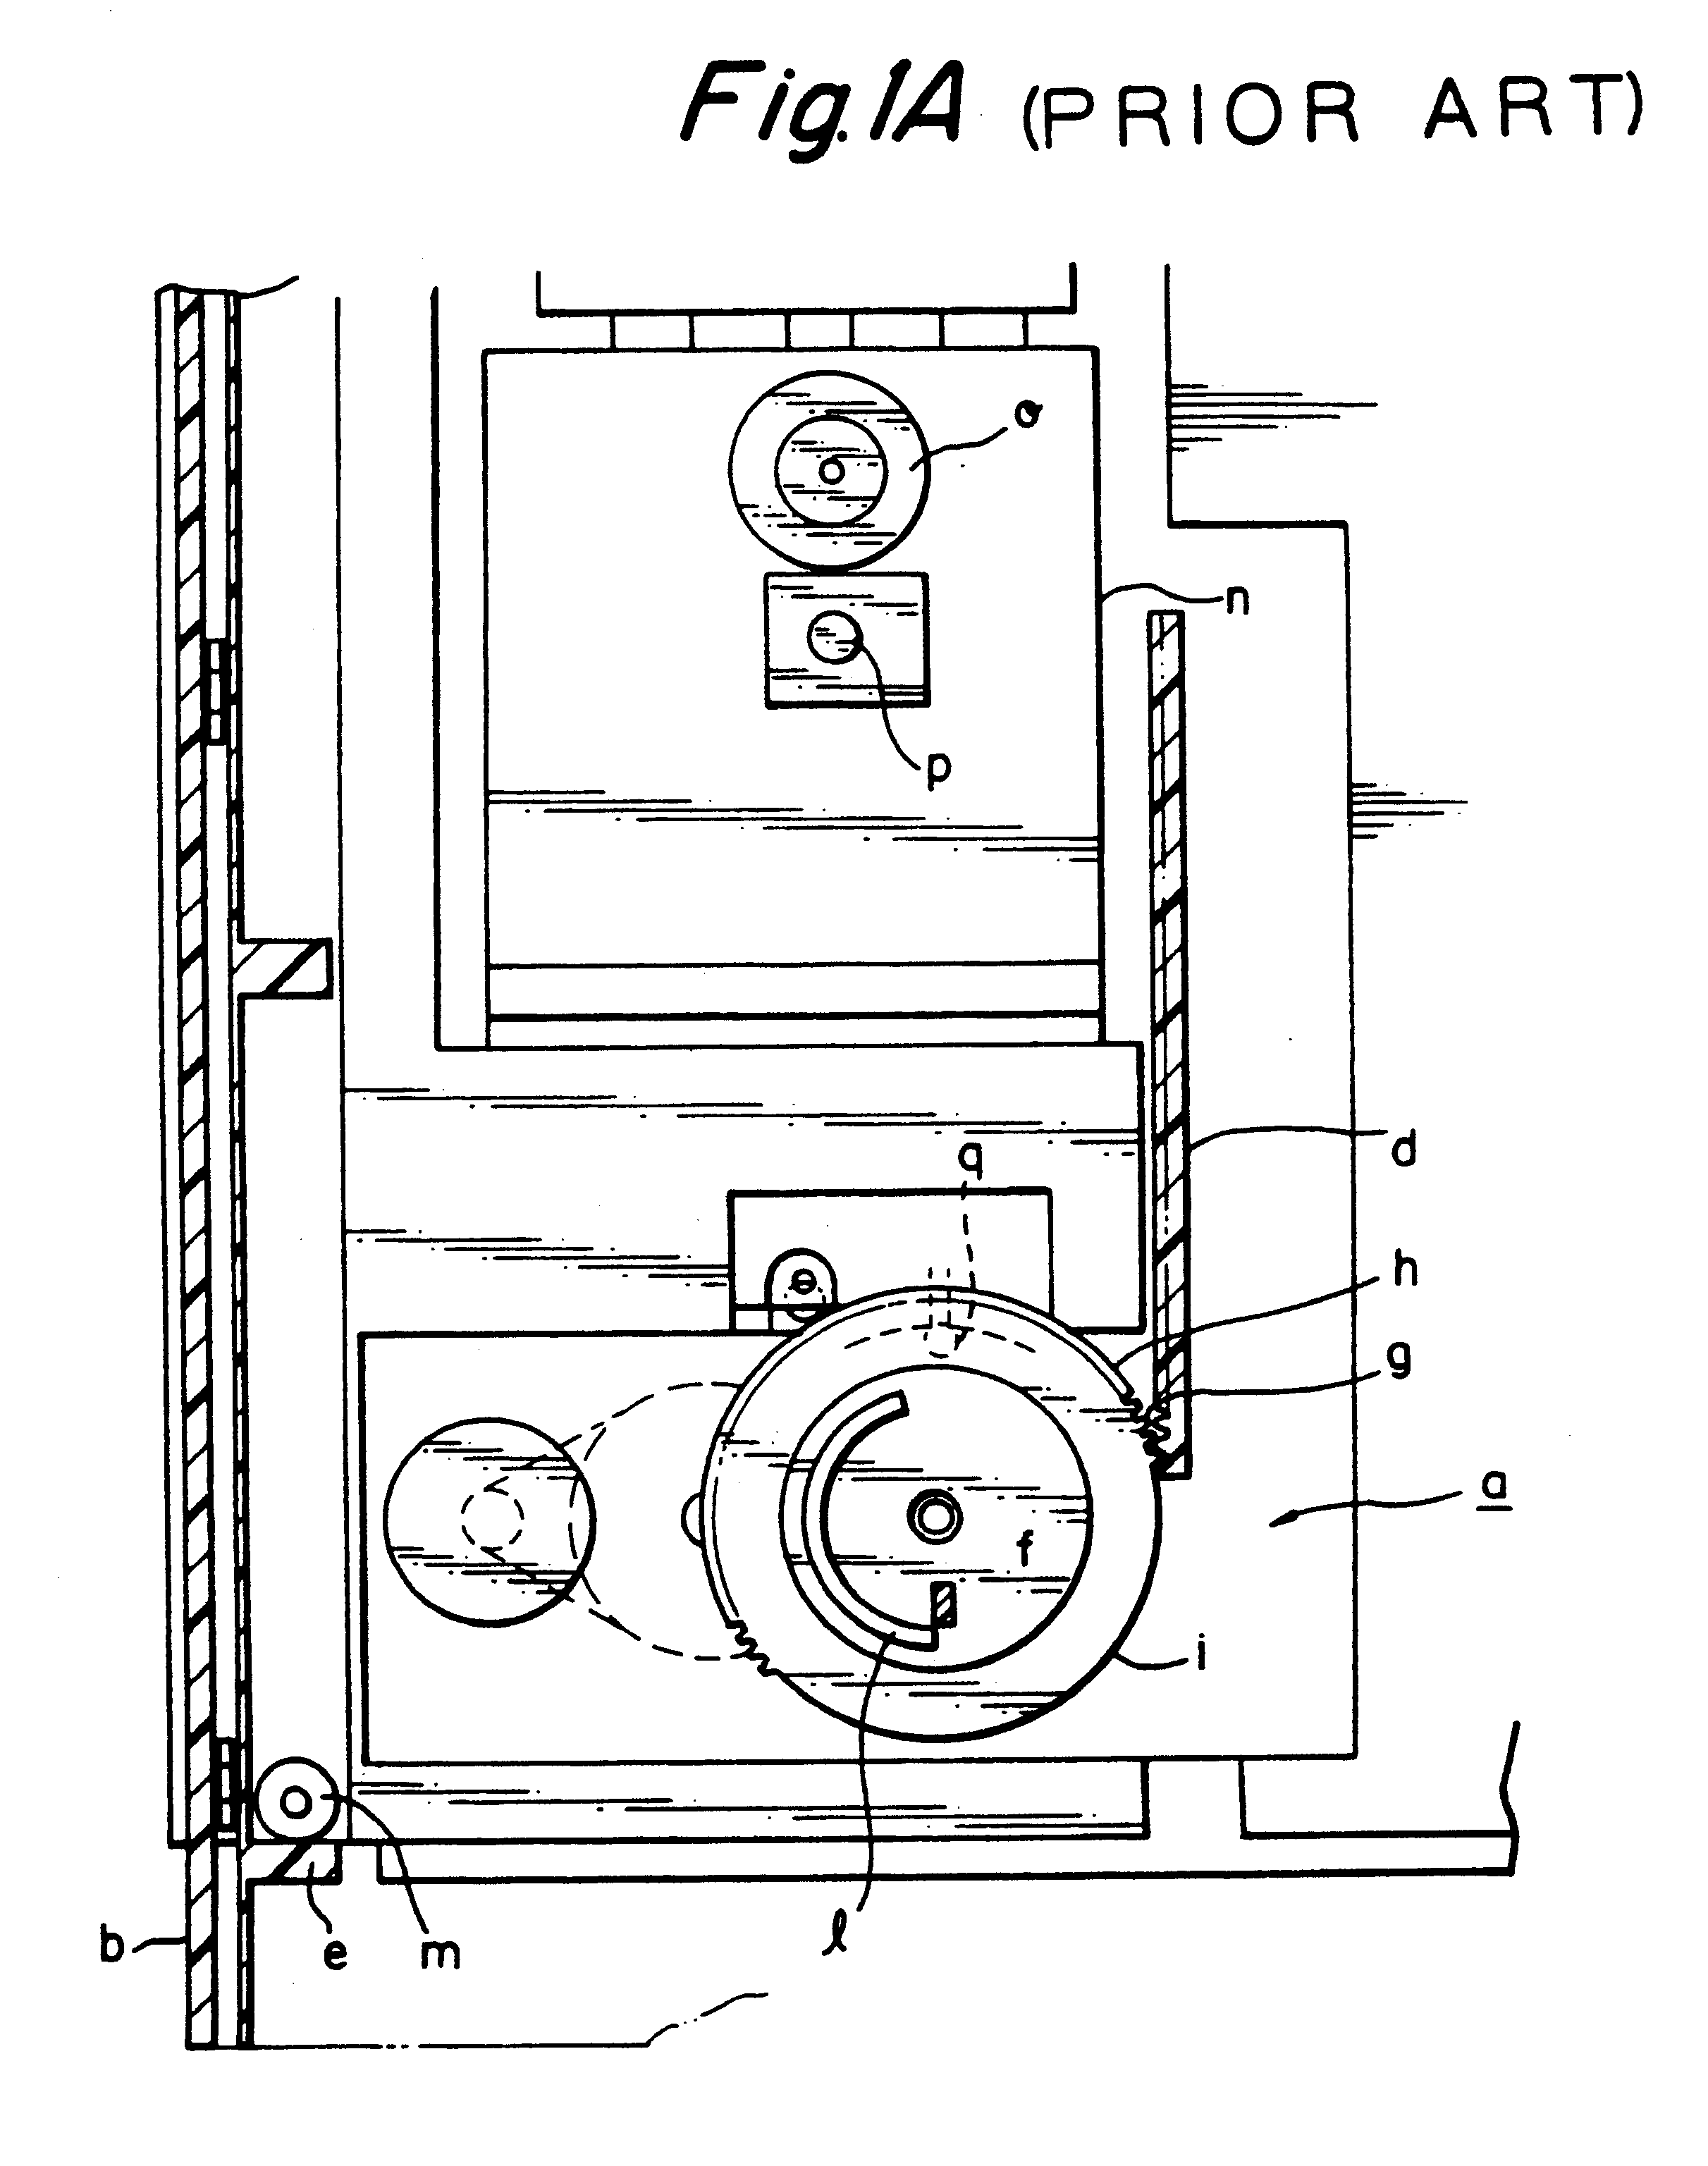 Disc loading mechanism in a disc player for positioning a disc and an optical pickup while reducing mechanical shocks to the disc tray